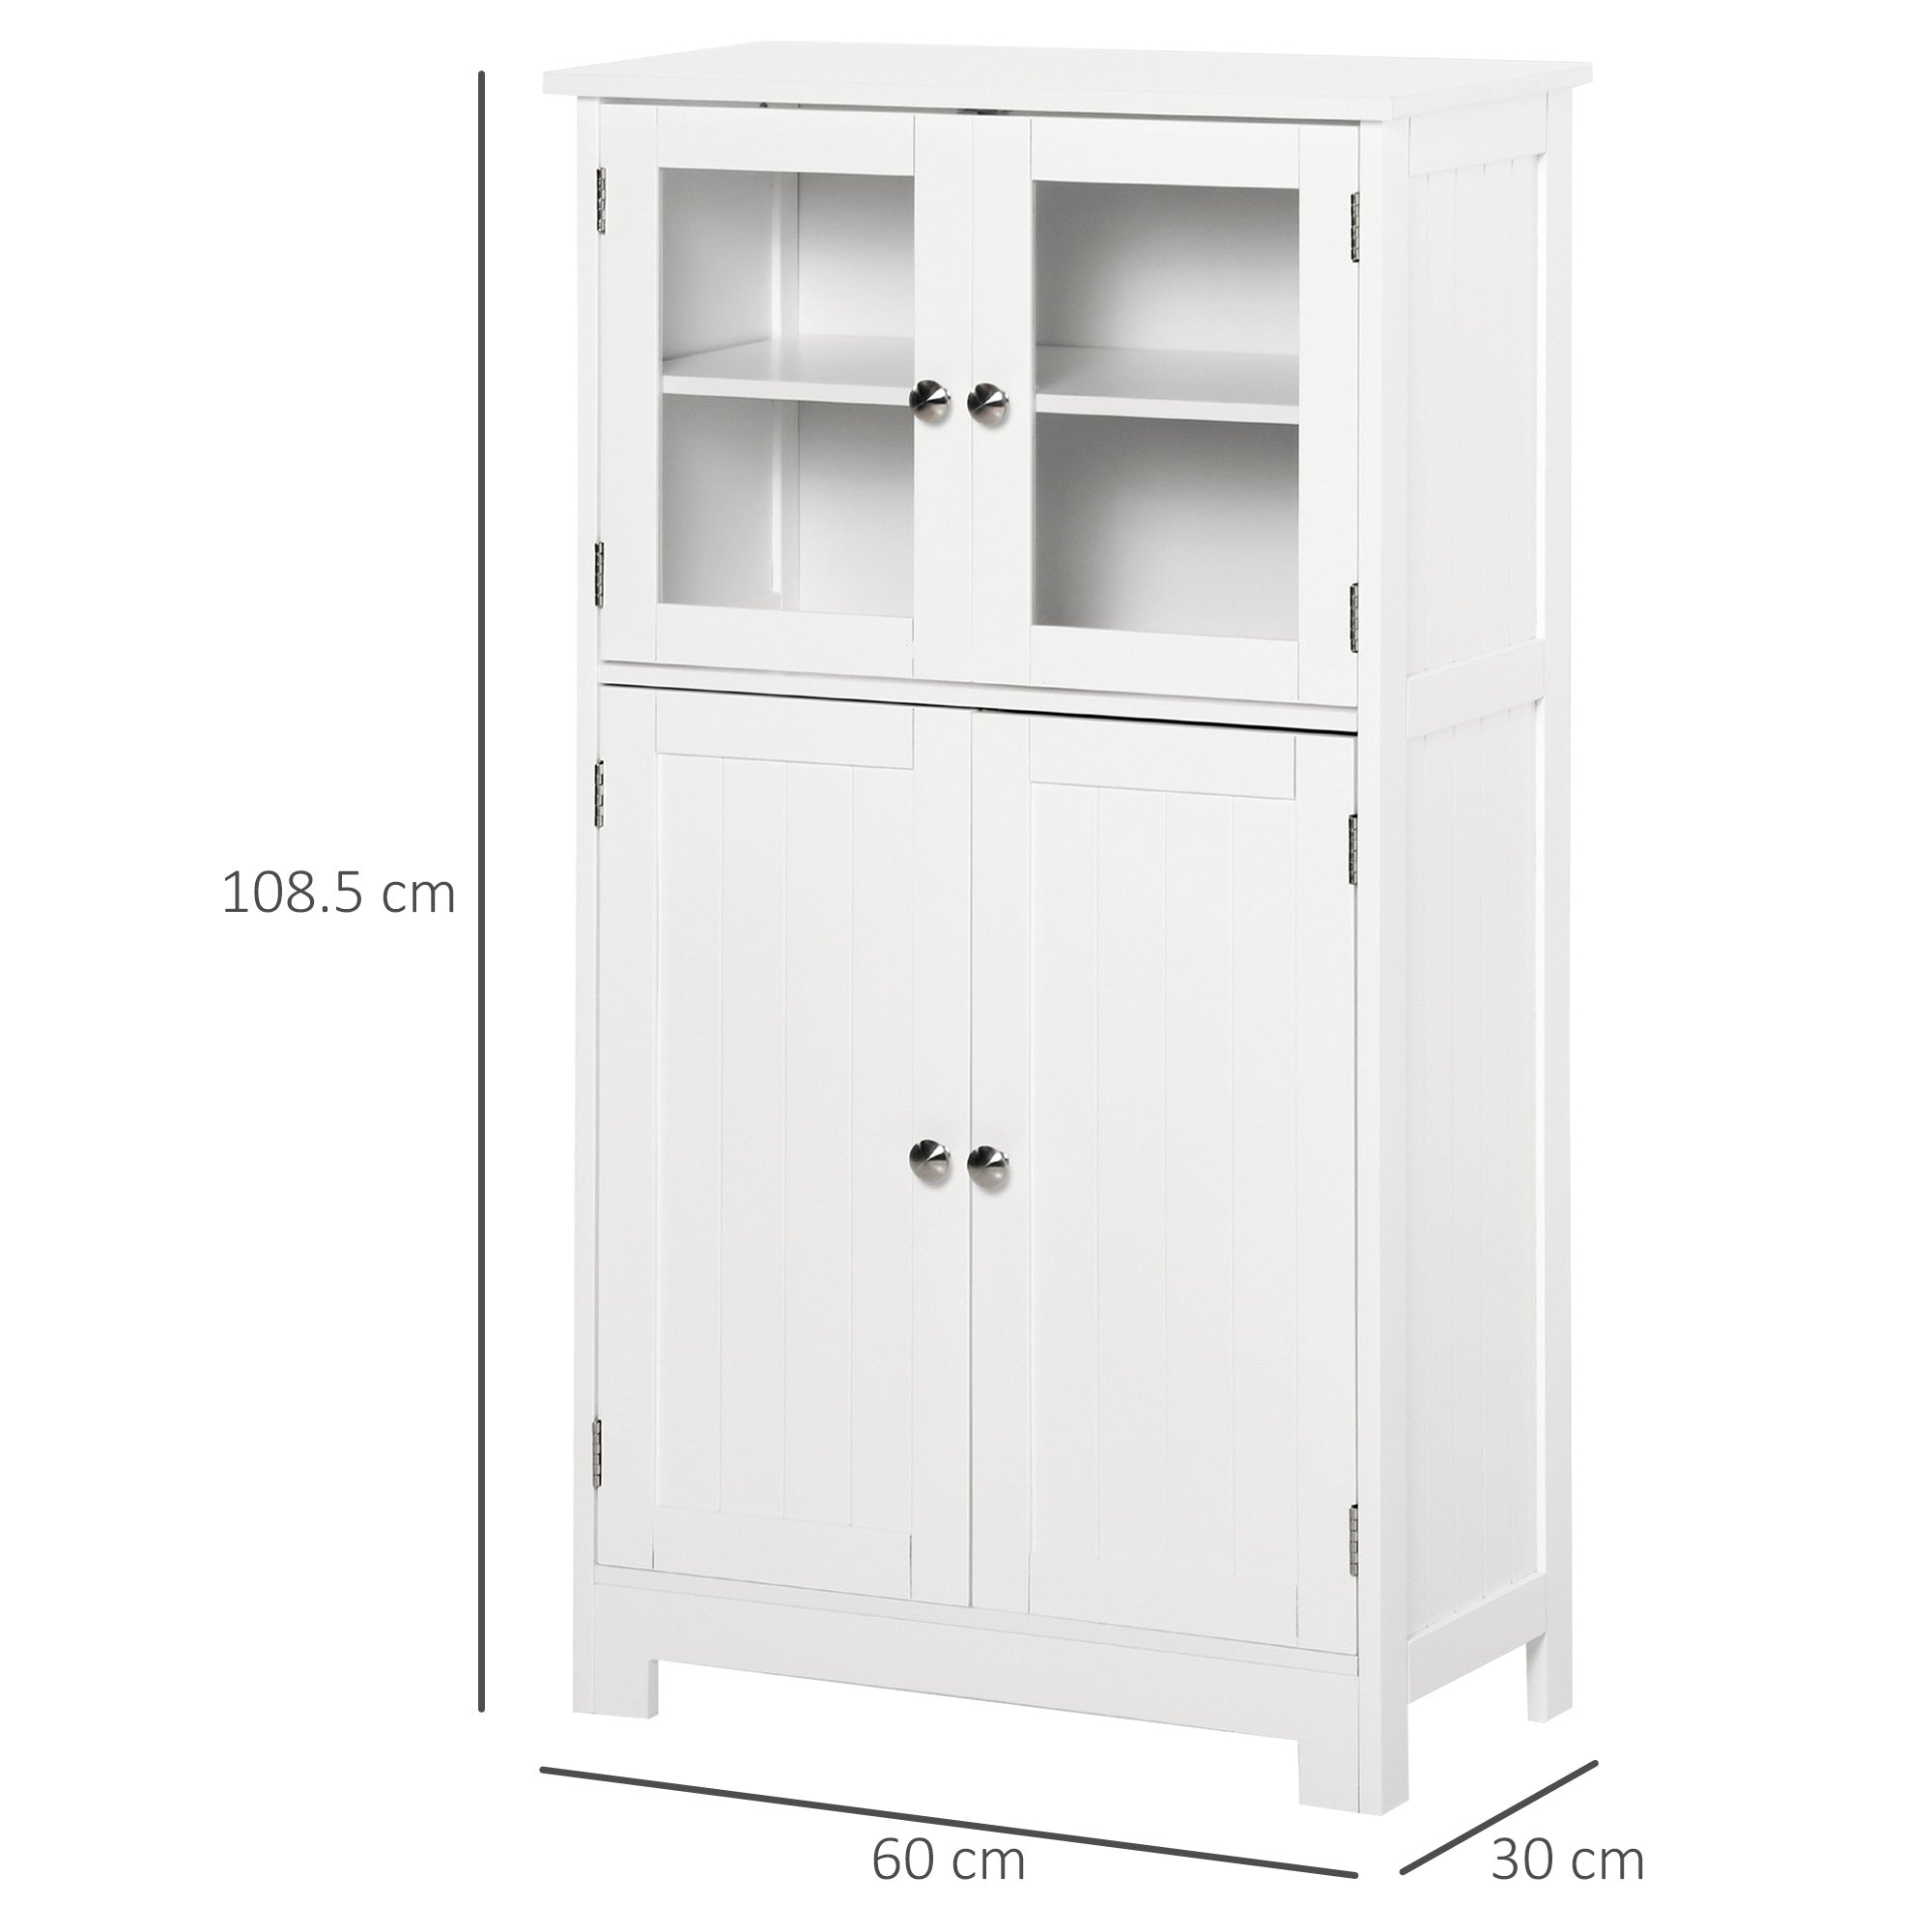 Bathroom Floor Storage Cabinet with Tempered Glass Doors and Adjustable Shelf, Free Standing Organizer for Living Room Entryway, White-2